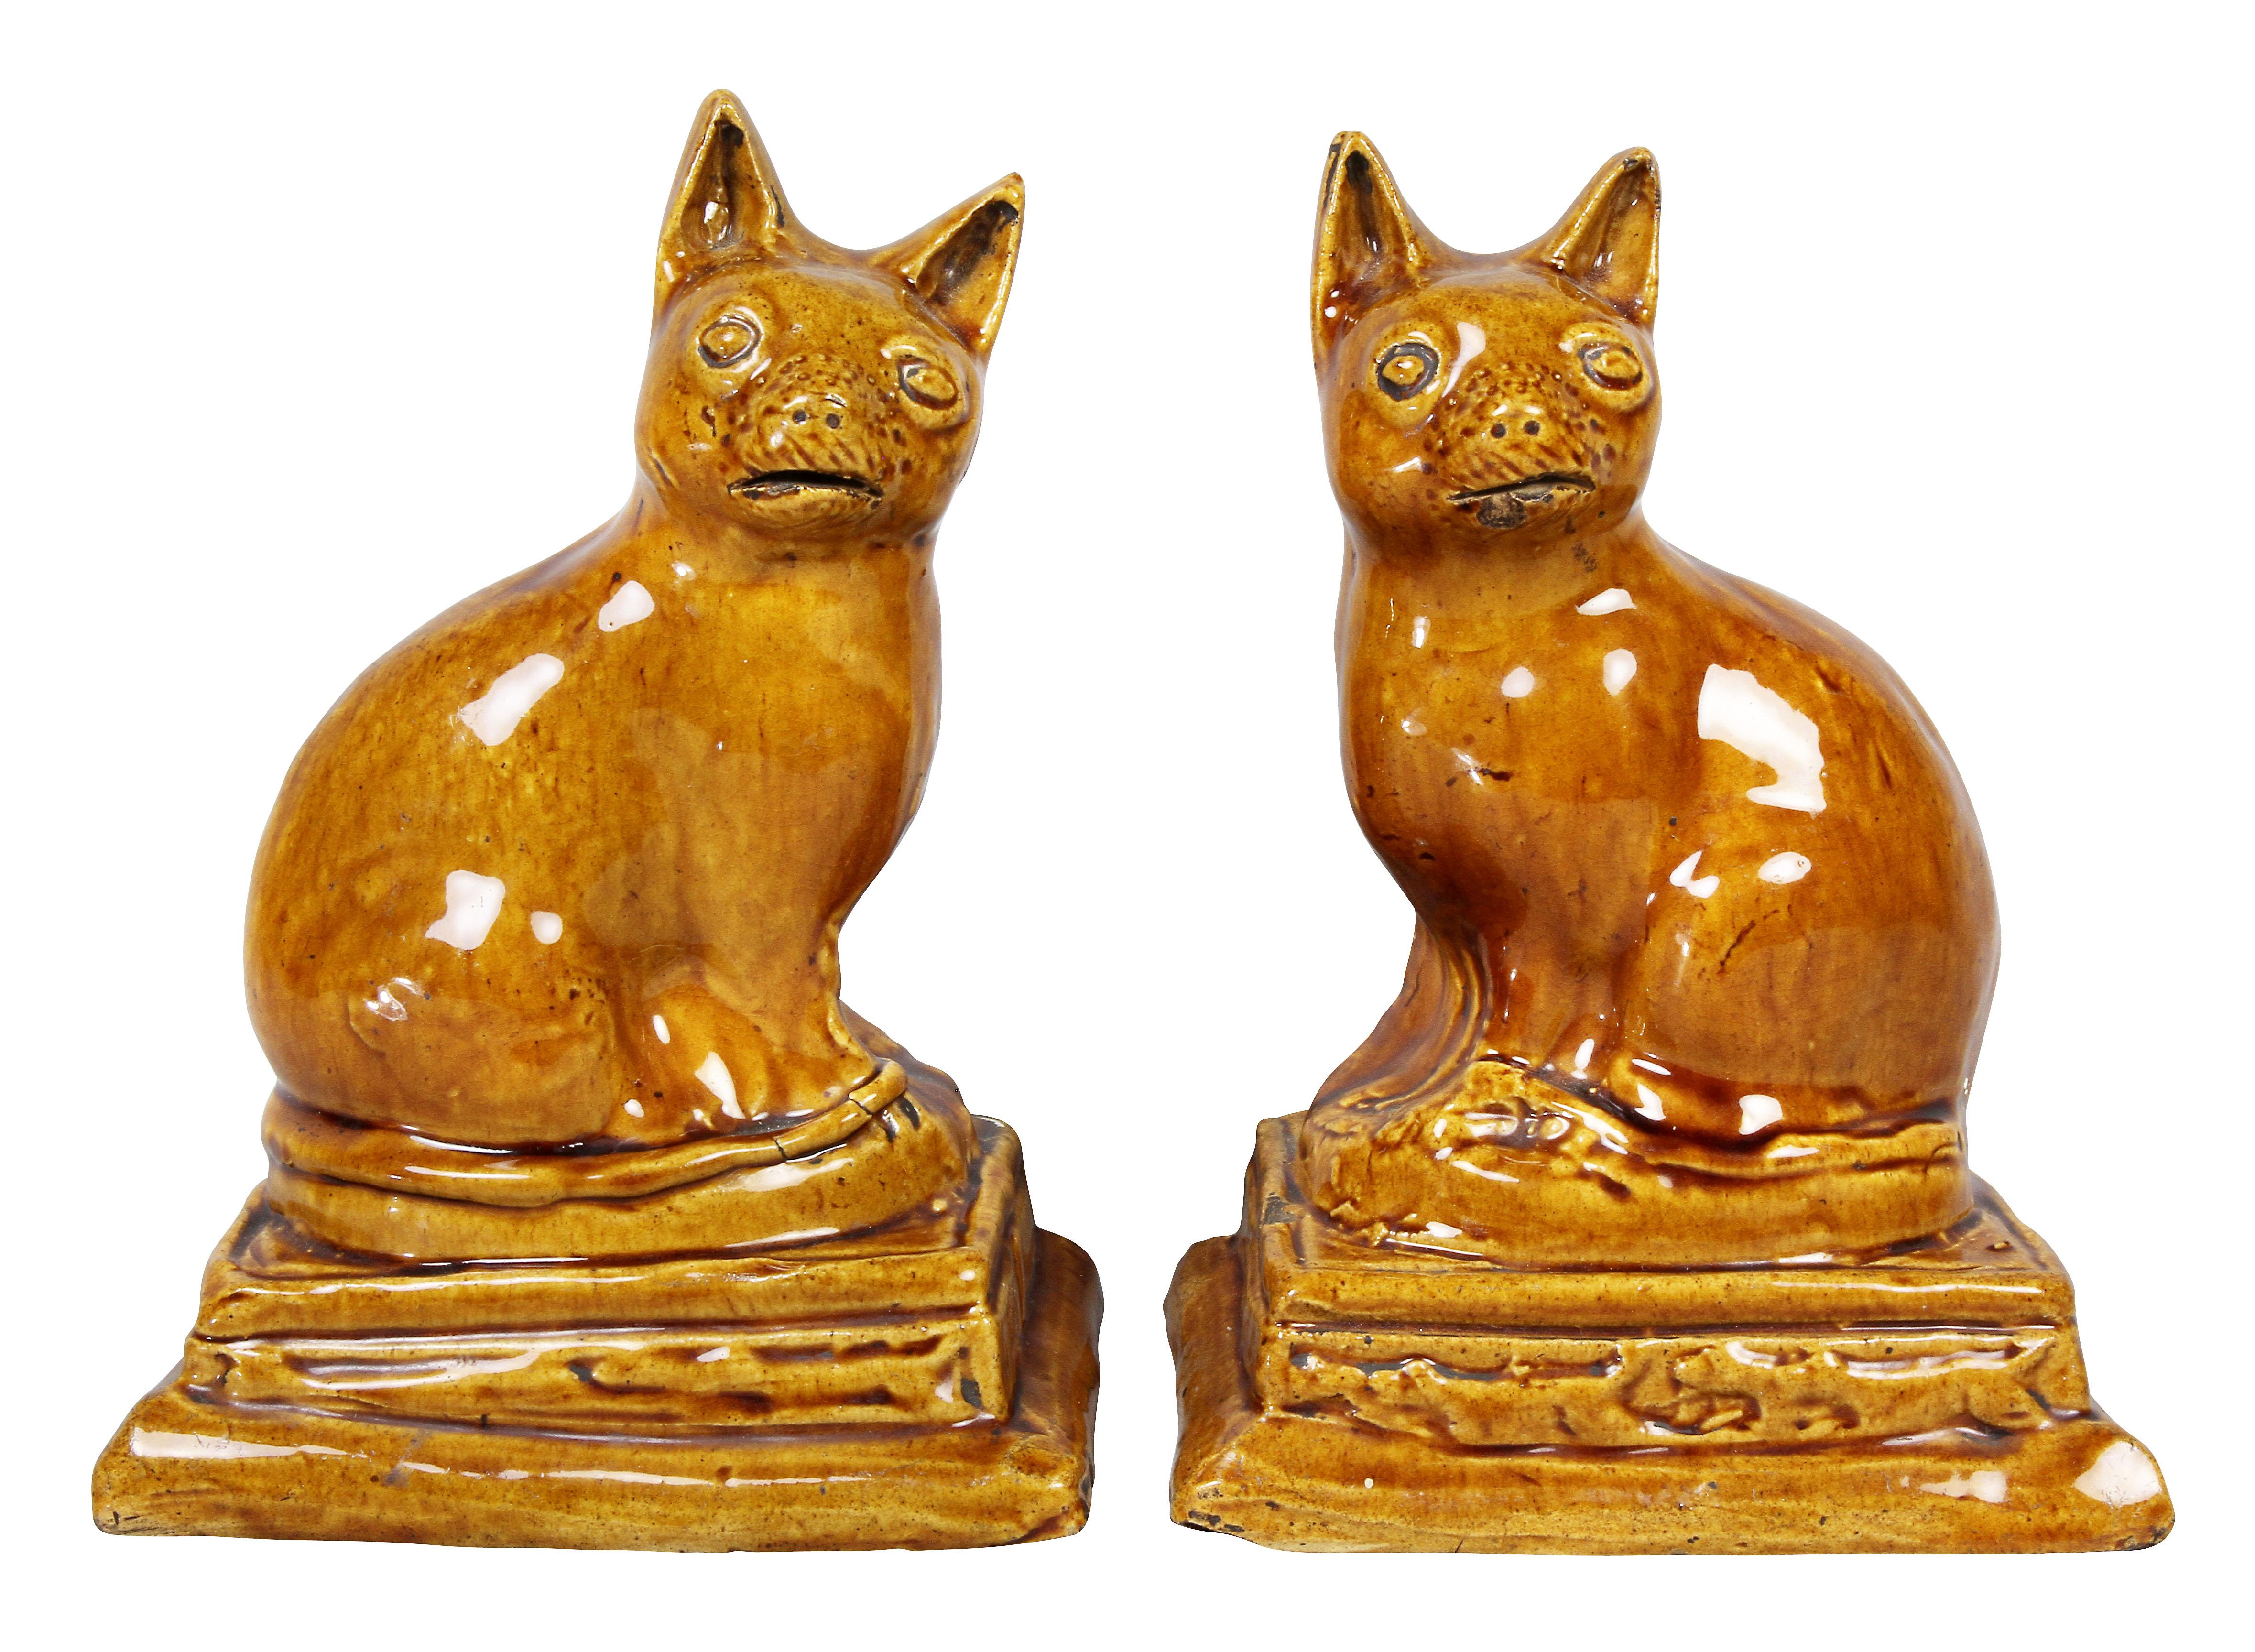 Each with cute expressions seated on a plinth base. Provenance, Manheim Antiques. Drue Heinz.